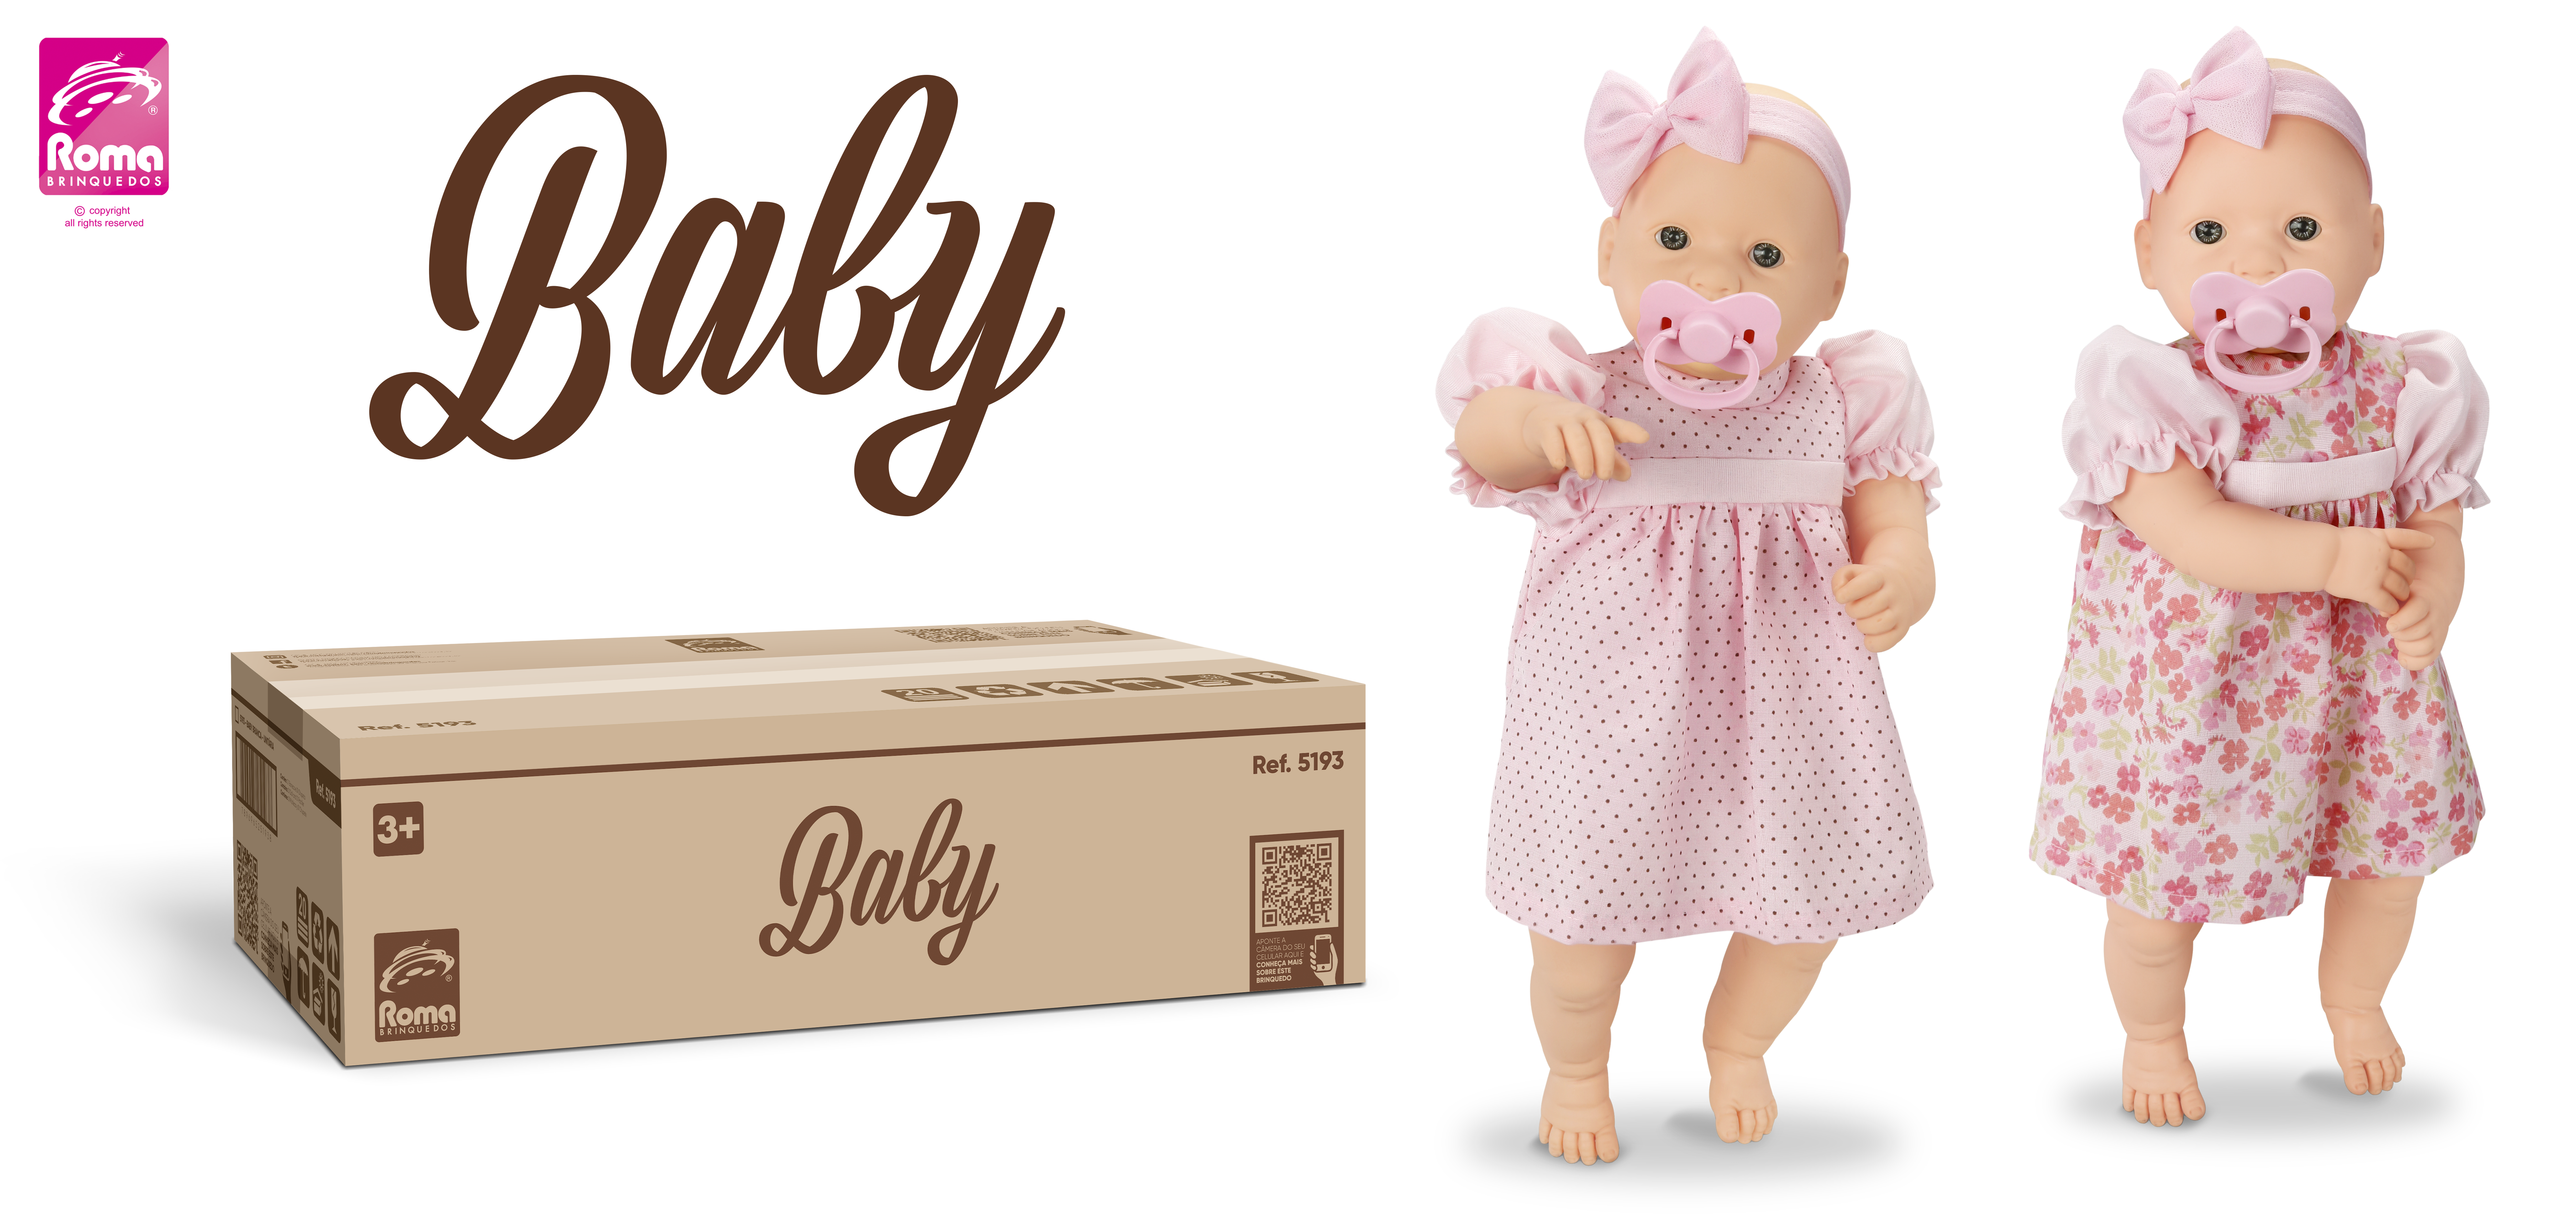 5193 - Baby - e-commerce.png